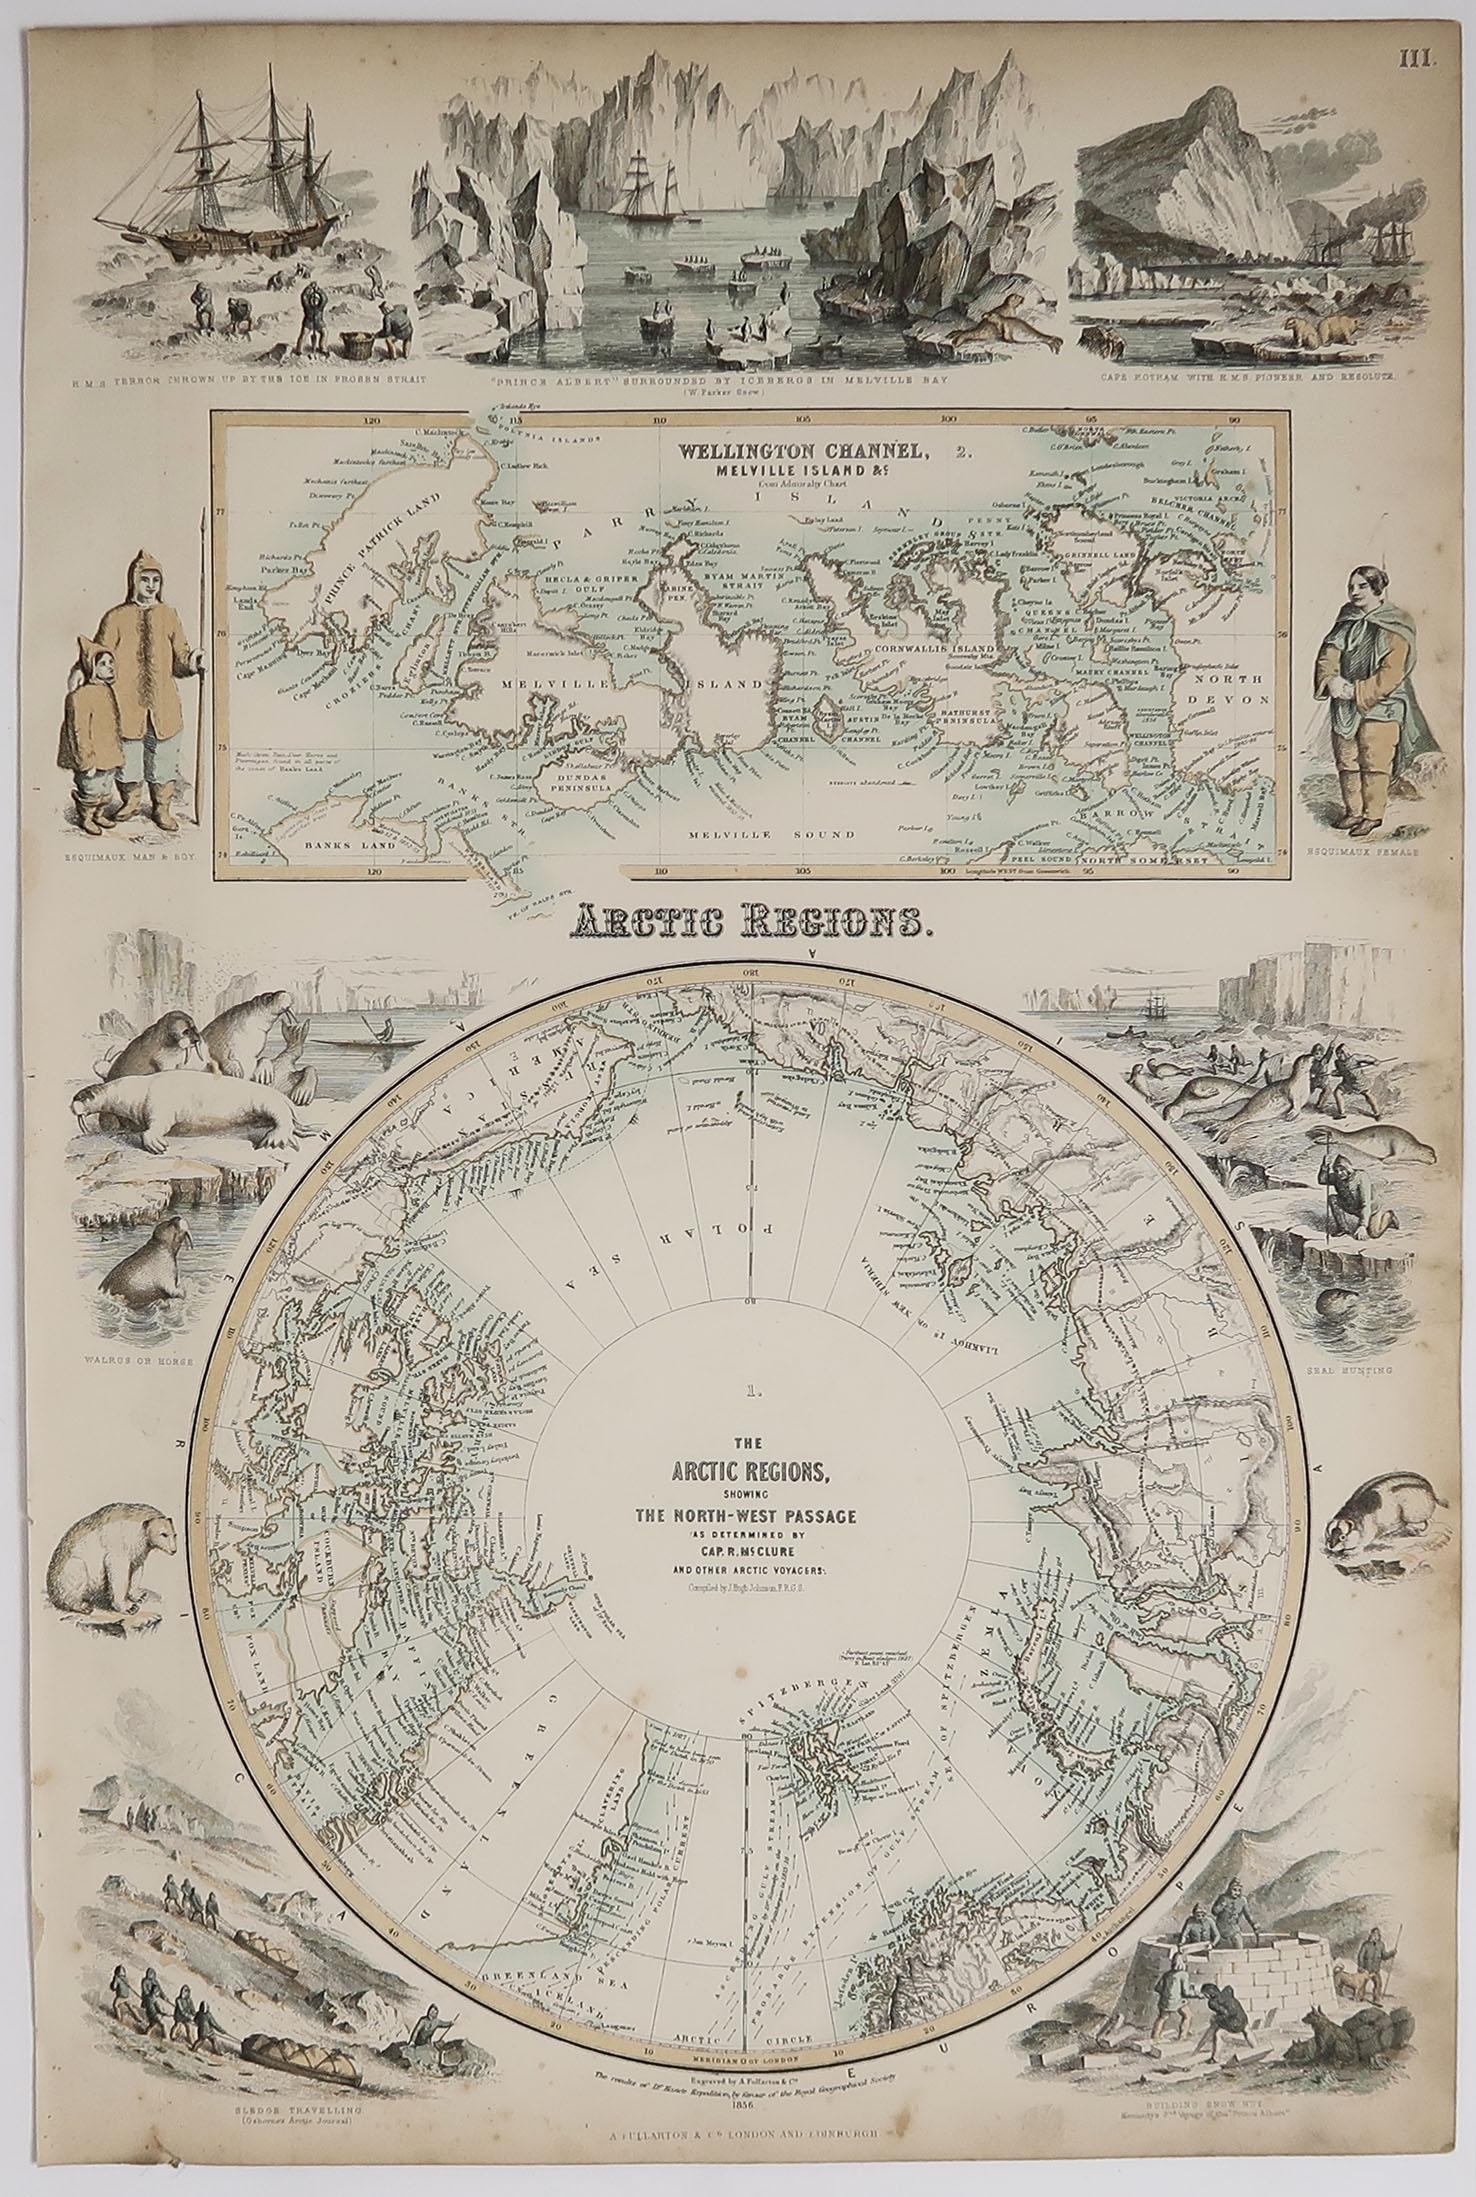 Great map of the Arctic Region

Wonderful figural border

From the celebrated Royal Illustrated Atlas

Lithograph. Original color. 

Published by Fullarton, Edinburgh, C.1870

Unframed.

Repair to a minor edge tear bottom